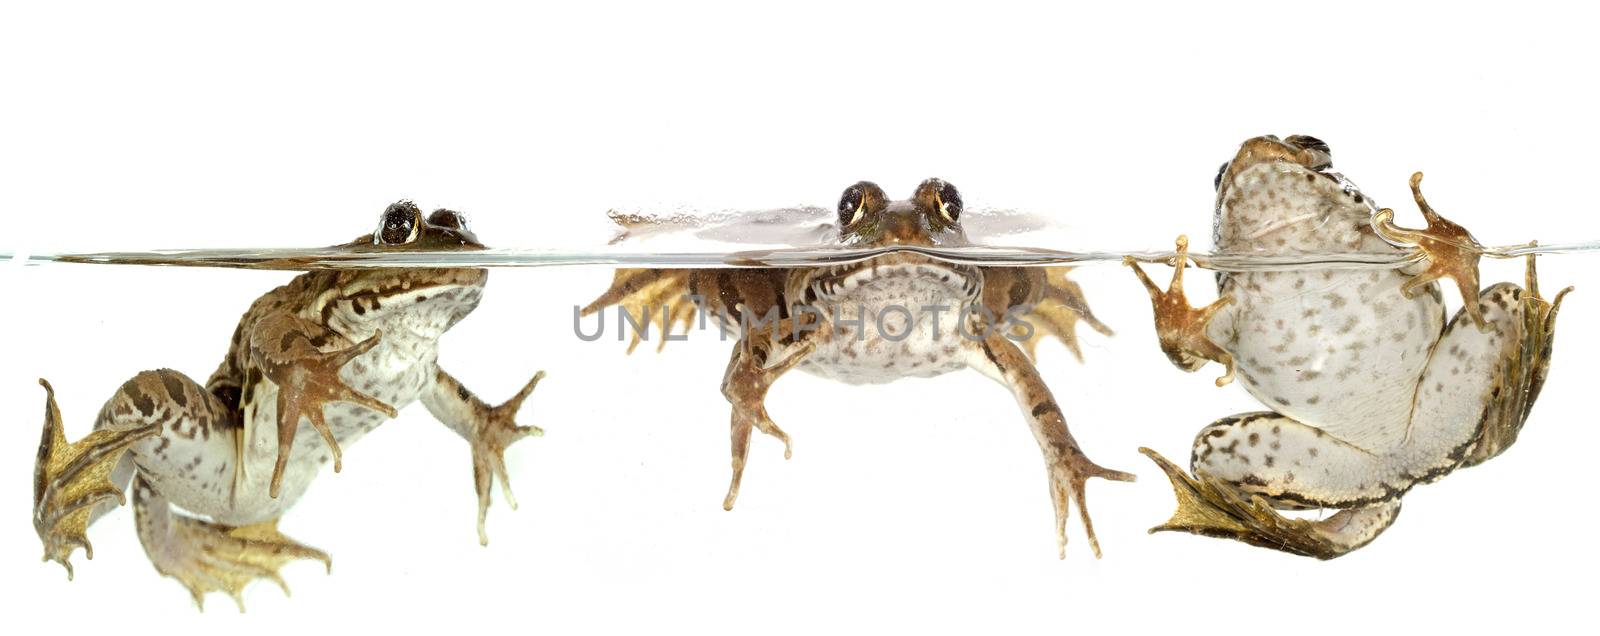 common frog in front of white background